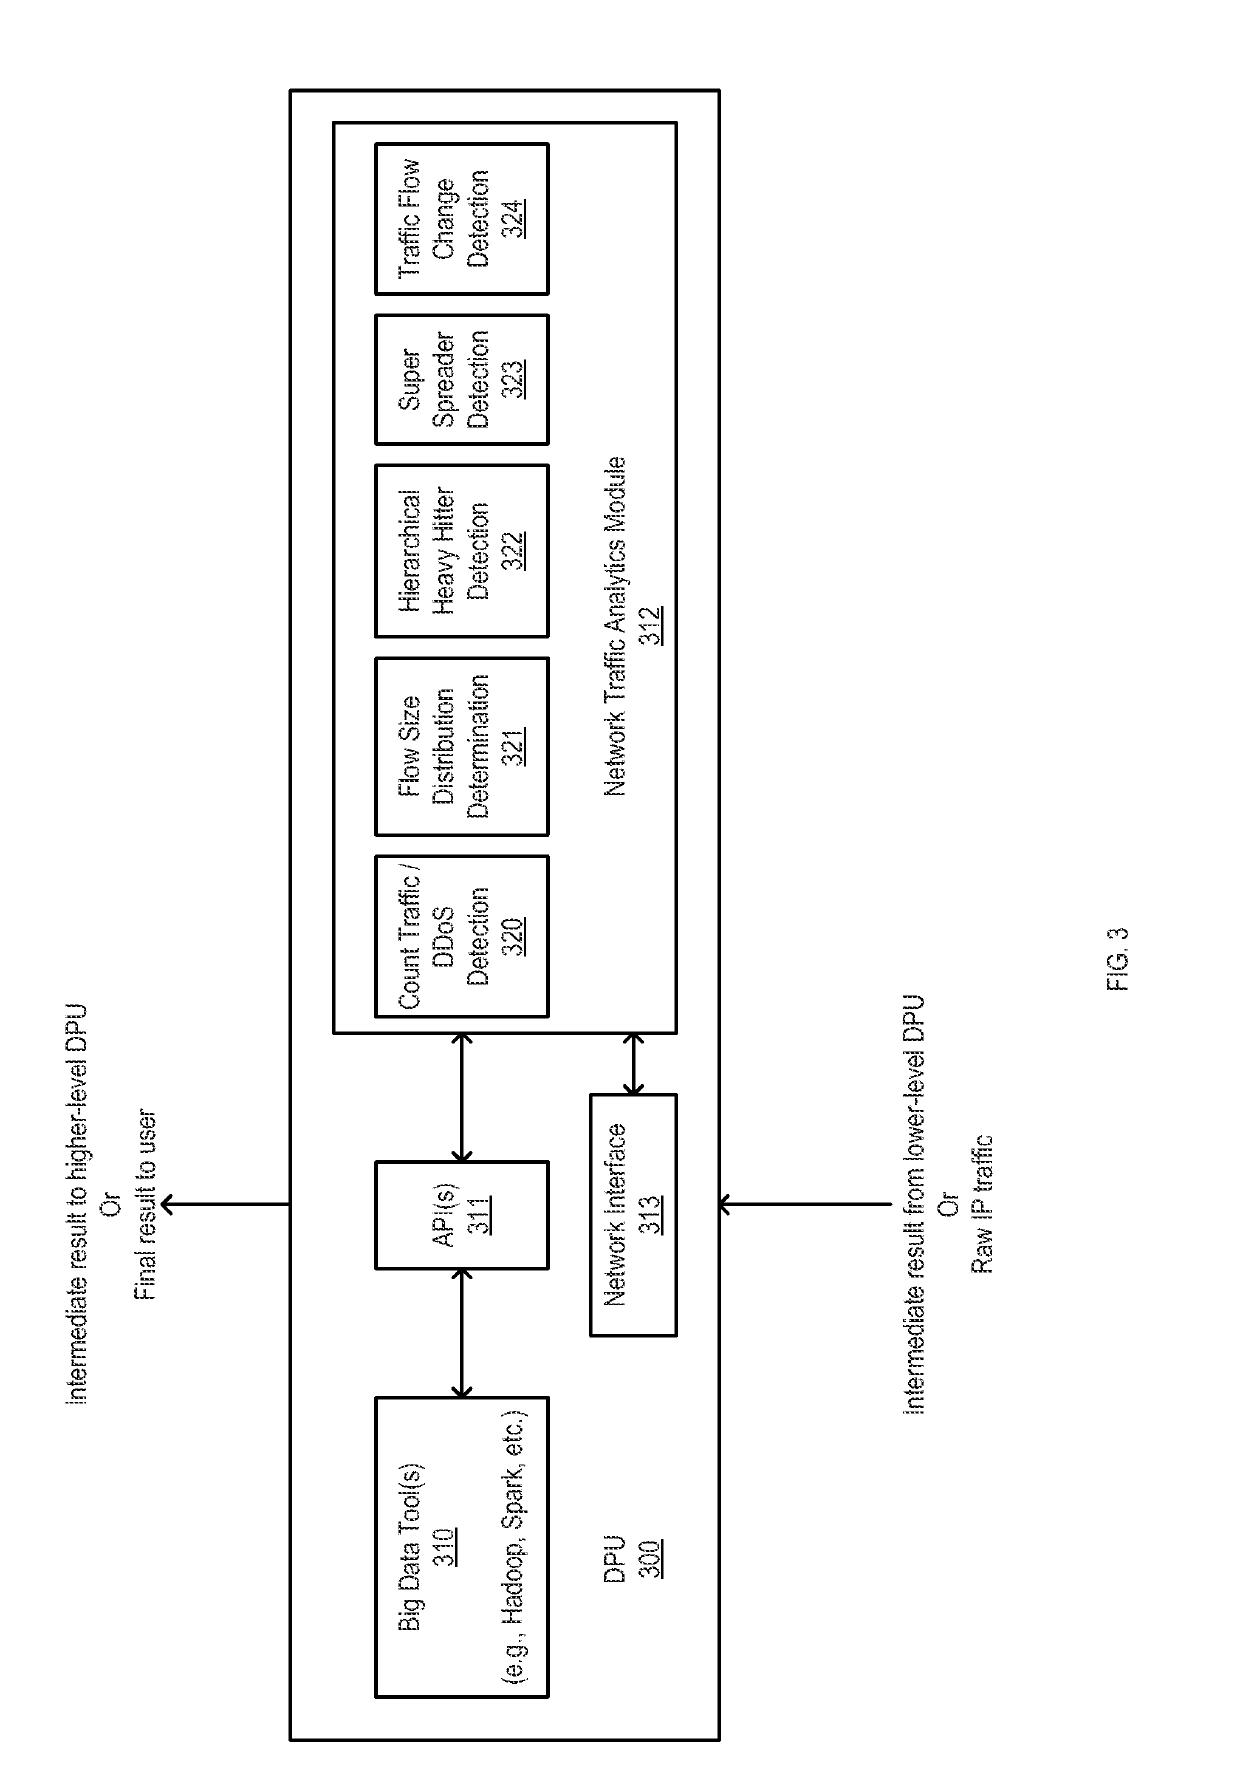 Method for scalable distributed network traffic analytics in telco